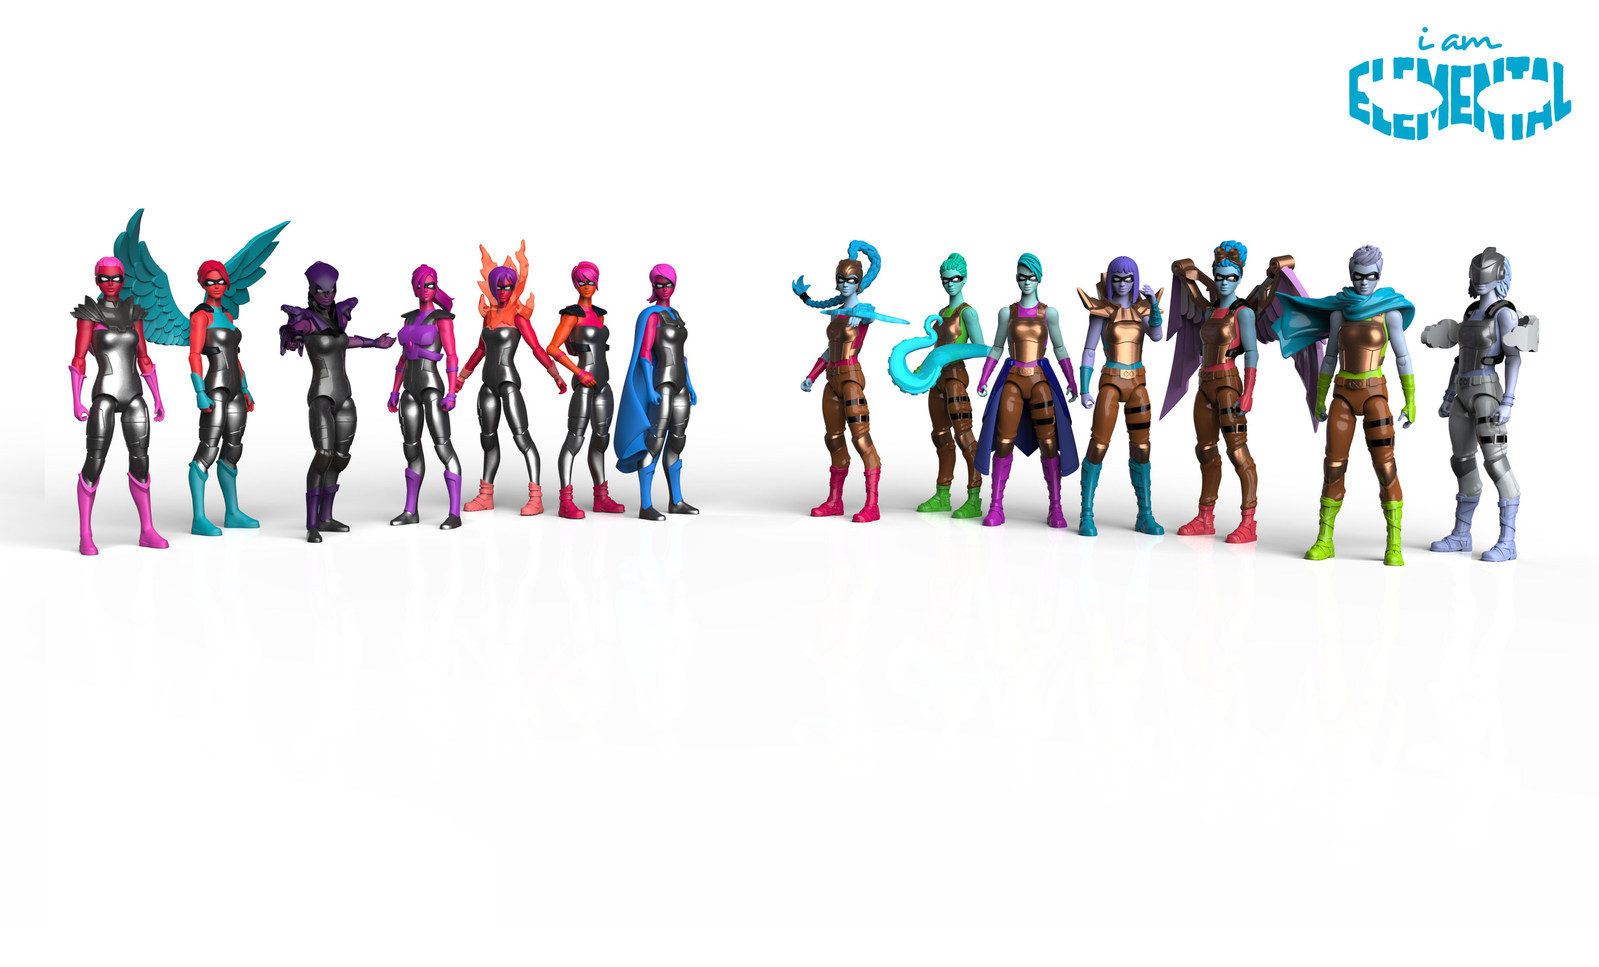 The Jim Henson Company to Develop Kids Series Based on IamElemental's Female Action Figures